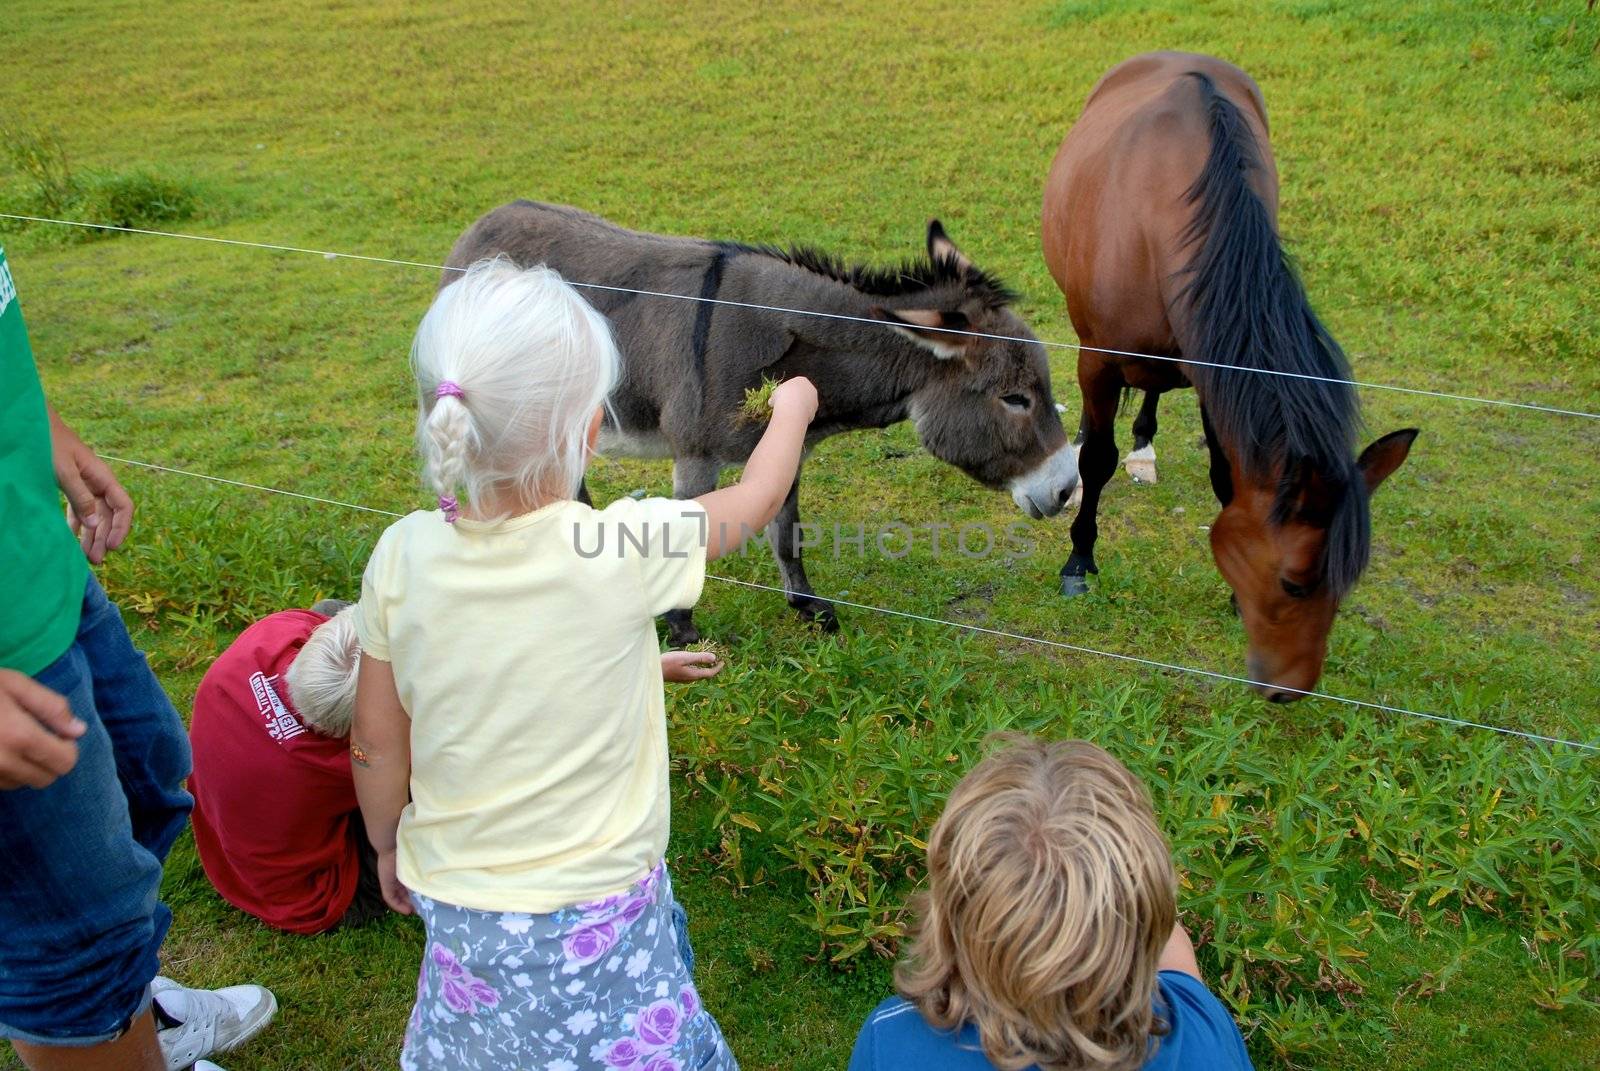 children feeding the horses. Please note: No negative use allowed.